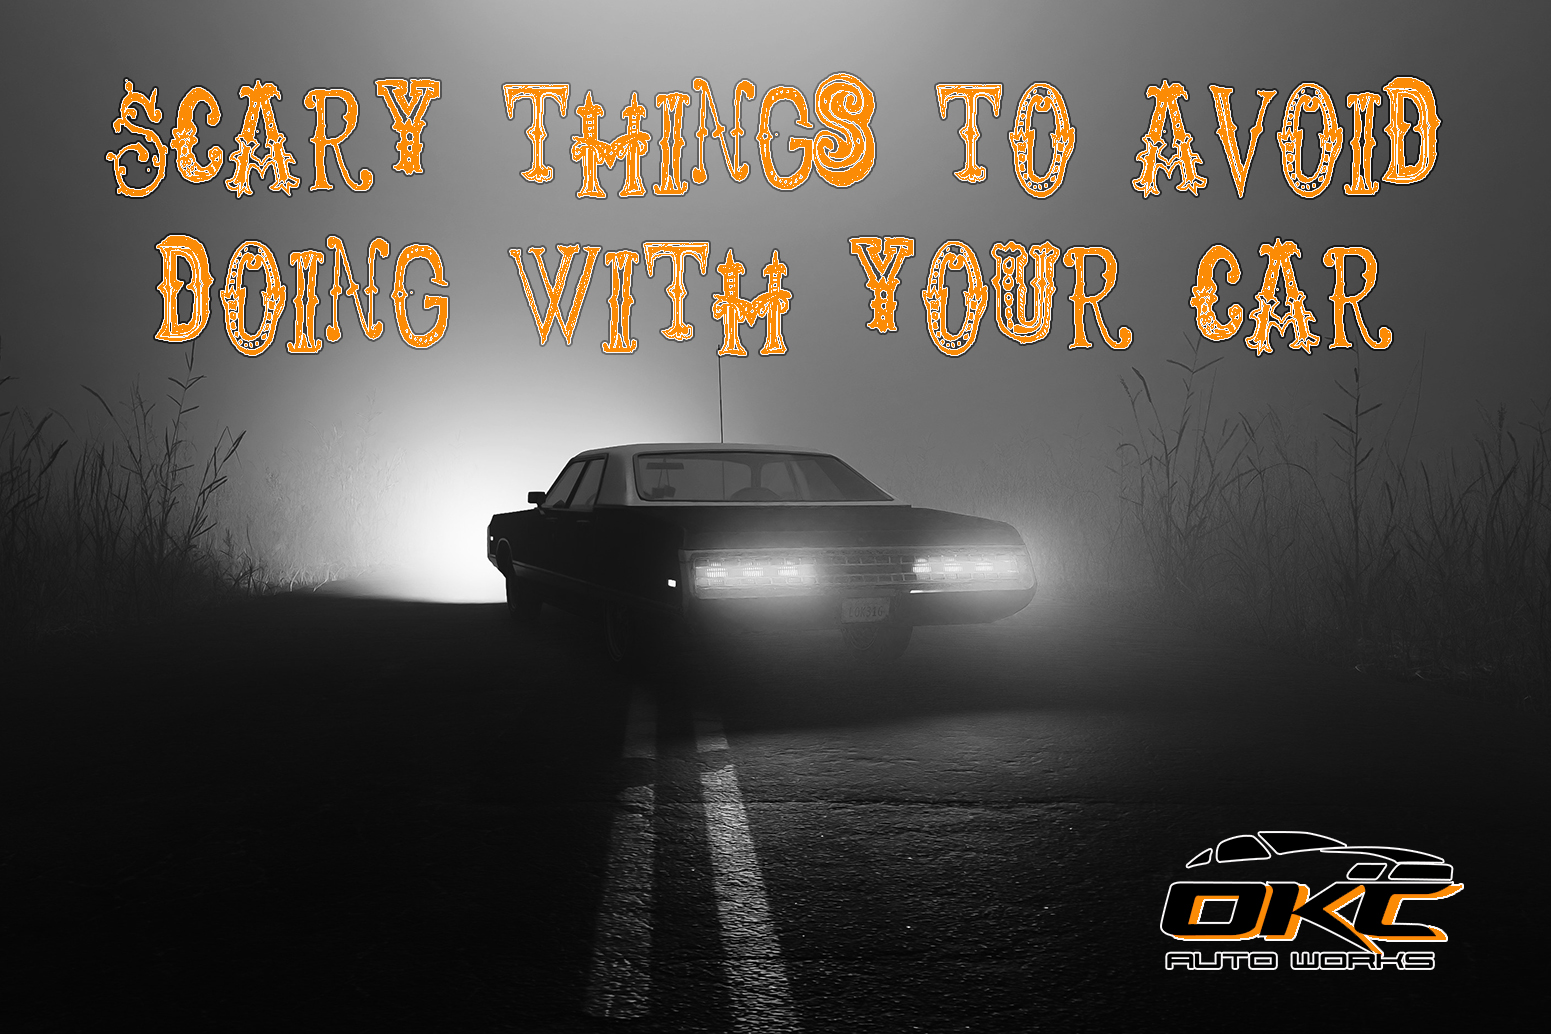 15 scary things to avoid doing in your vehicle